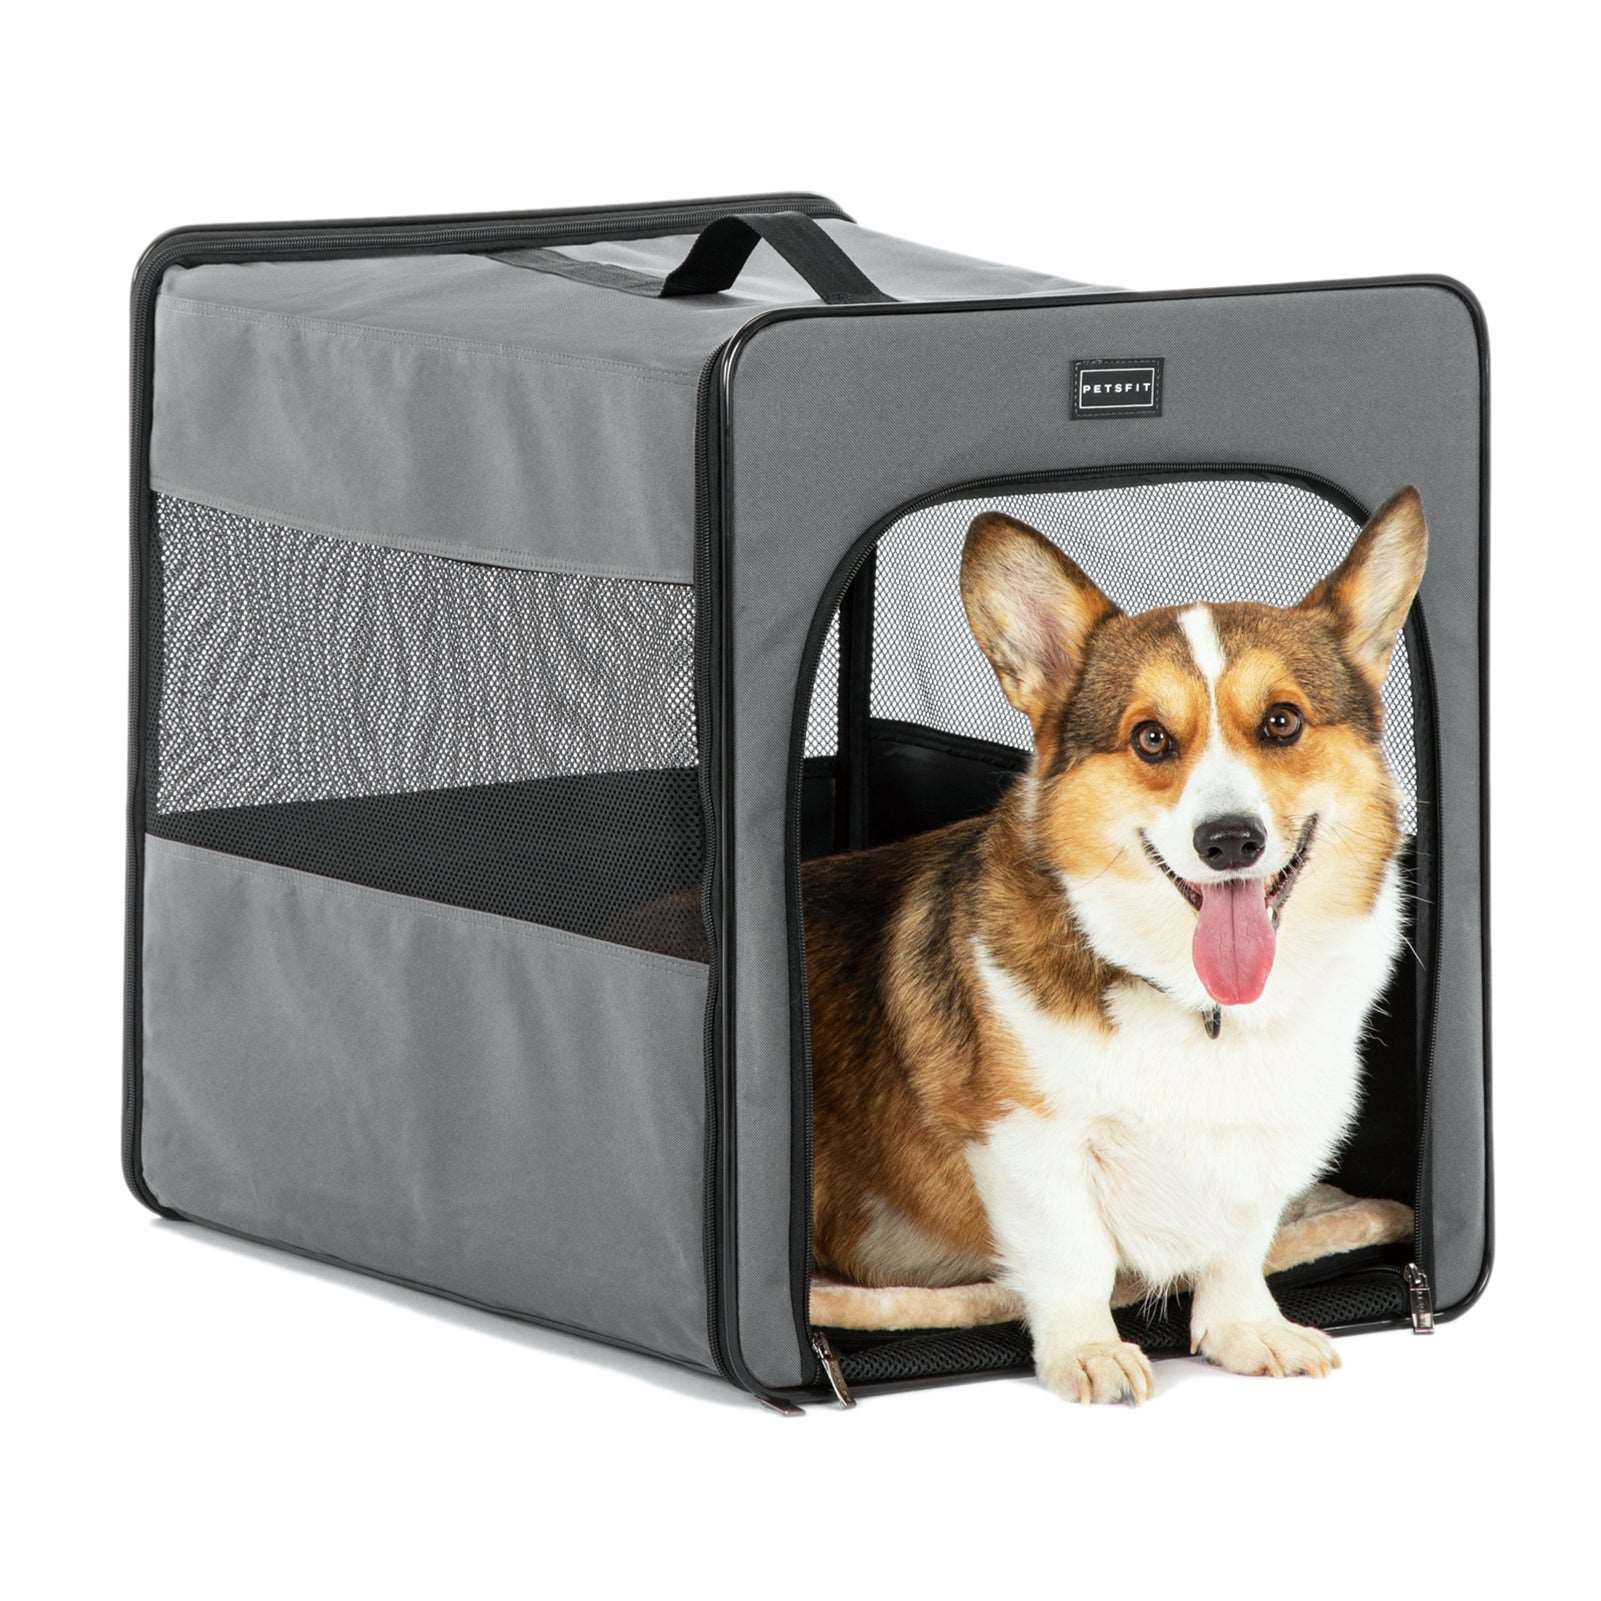 Petsfit-Portable-Dog-Crate-24-Inch-01